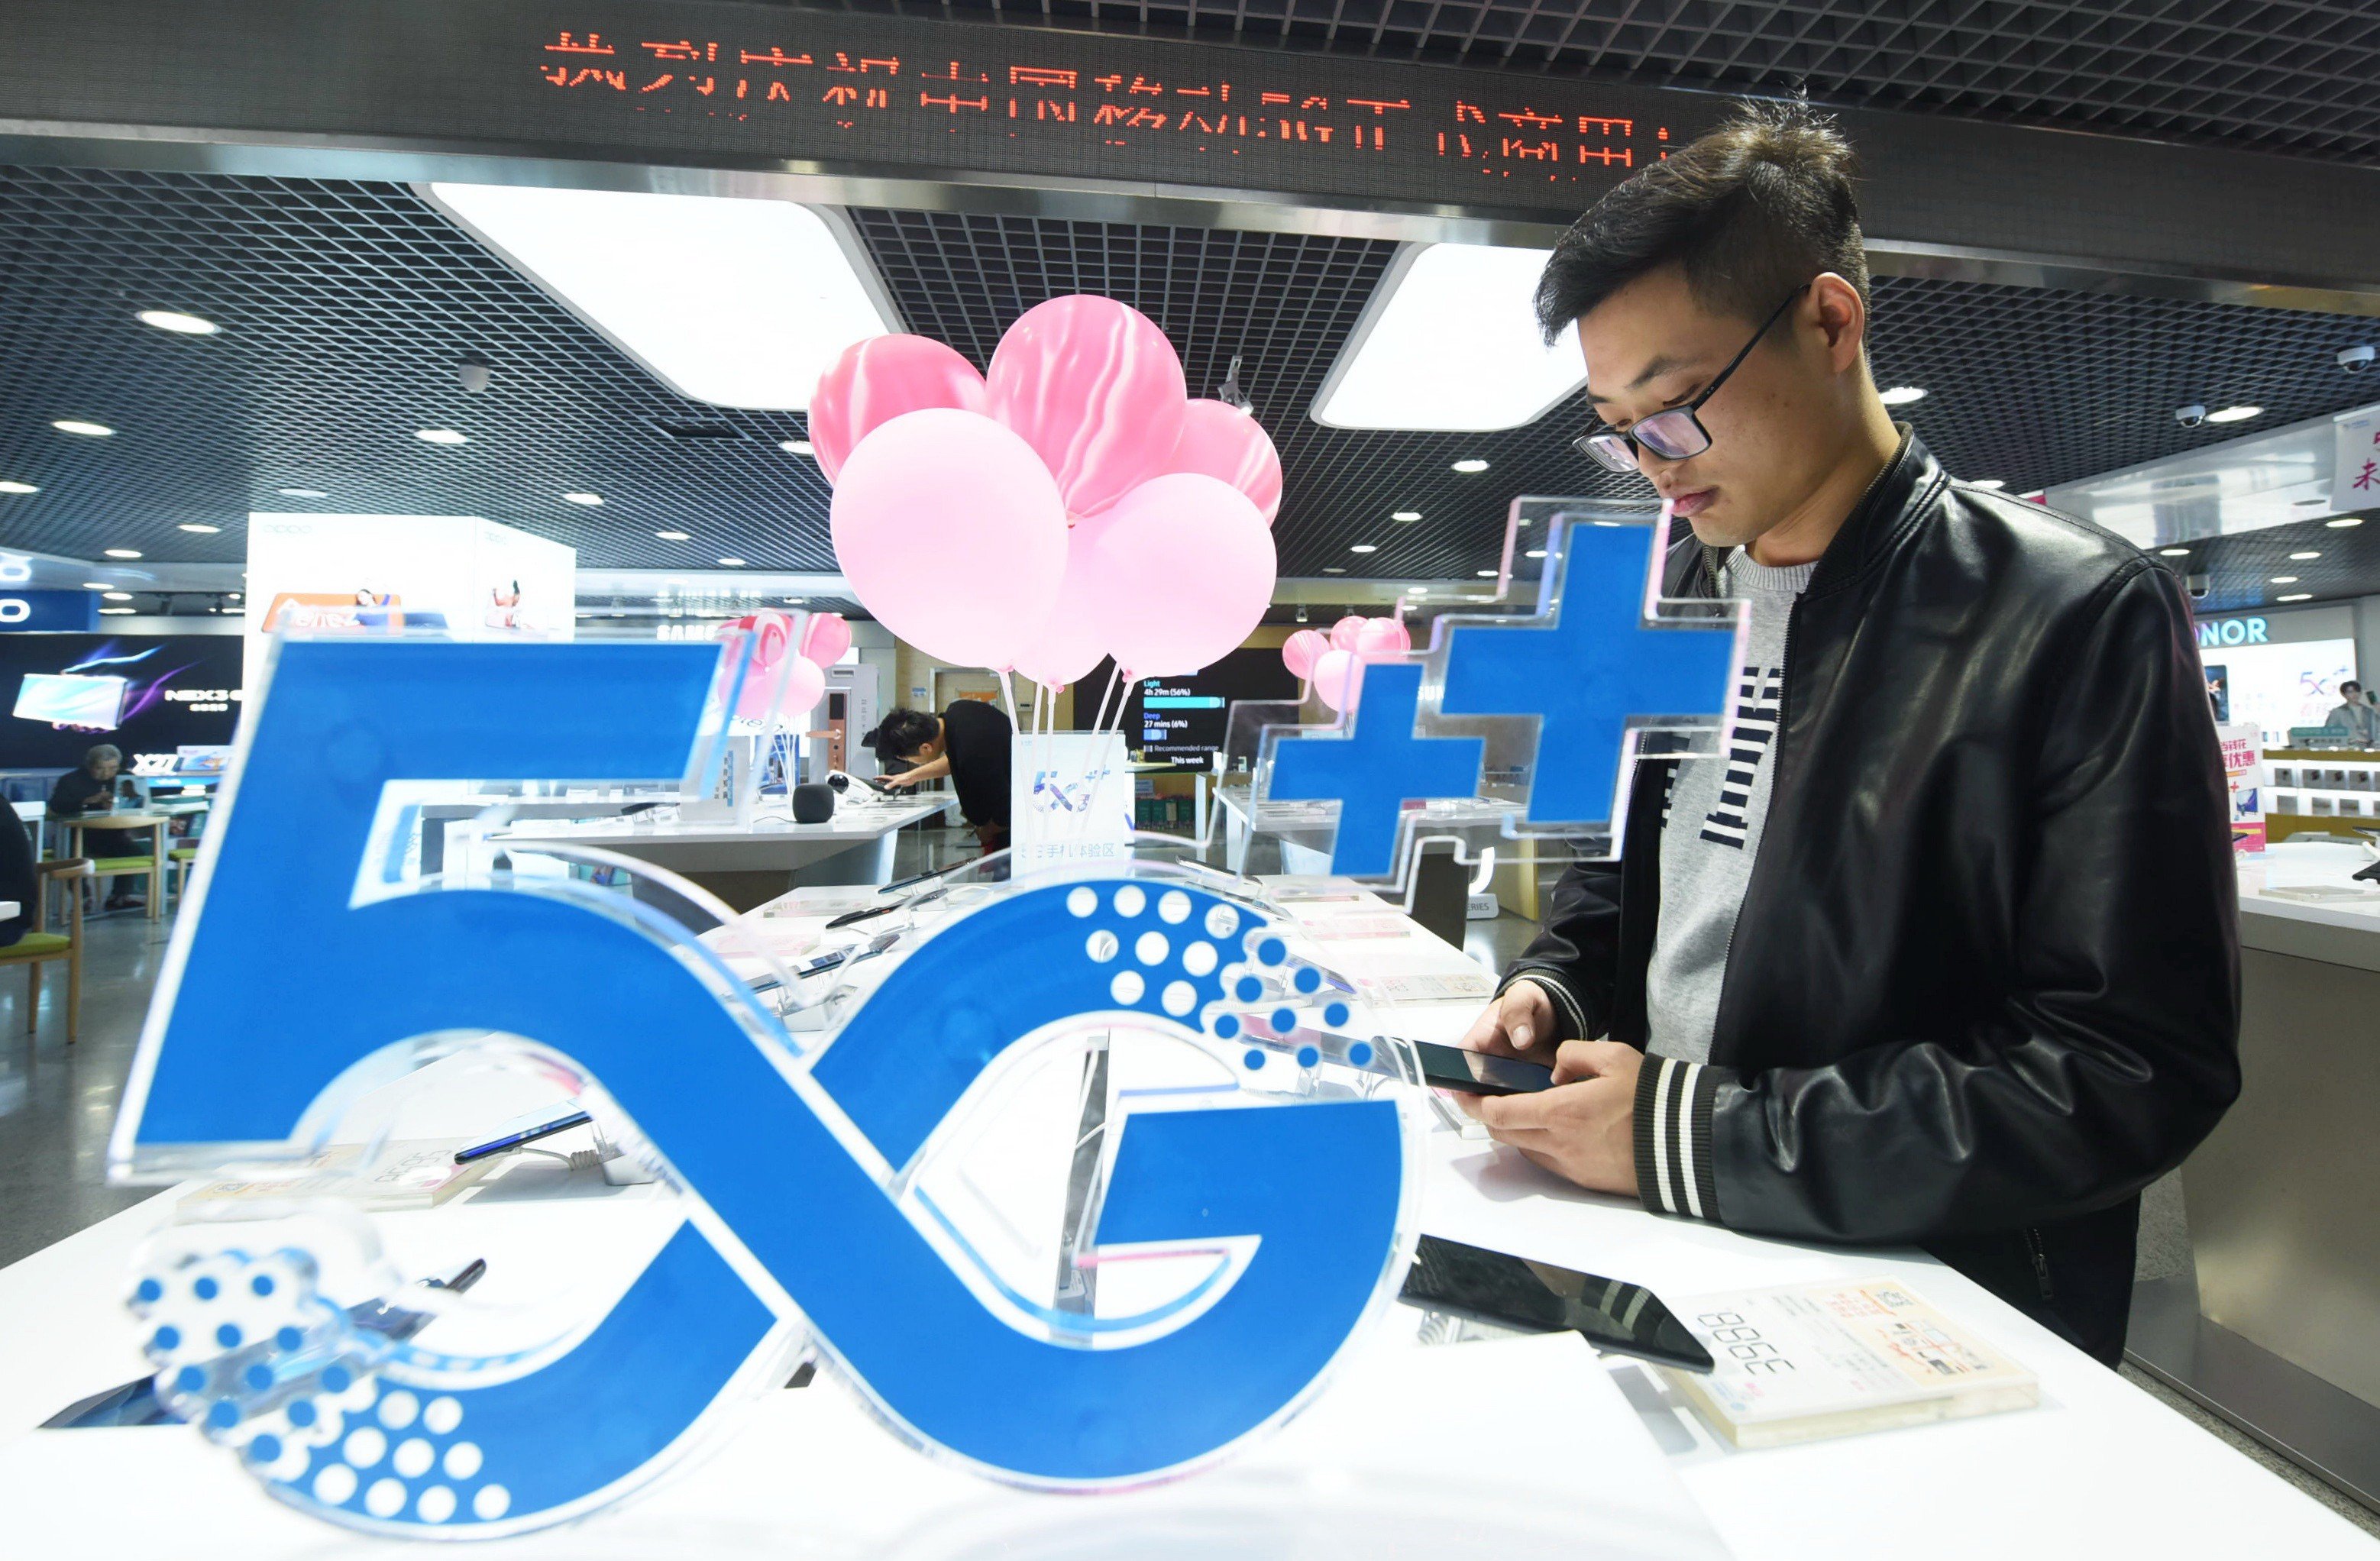 A Chinese customer tries out 5G services at a branch of China Mobile. Photo: EPA-EFE